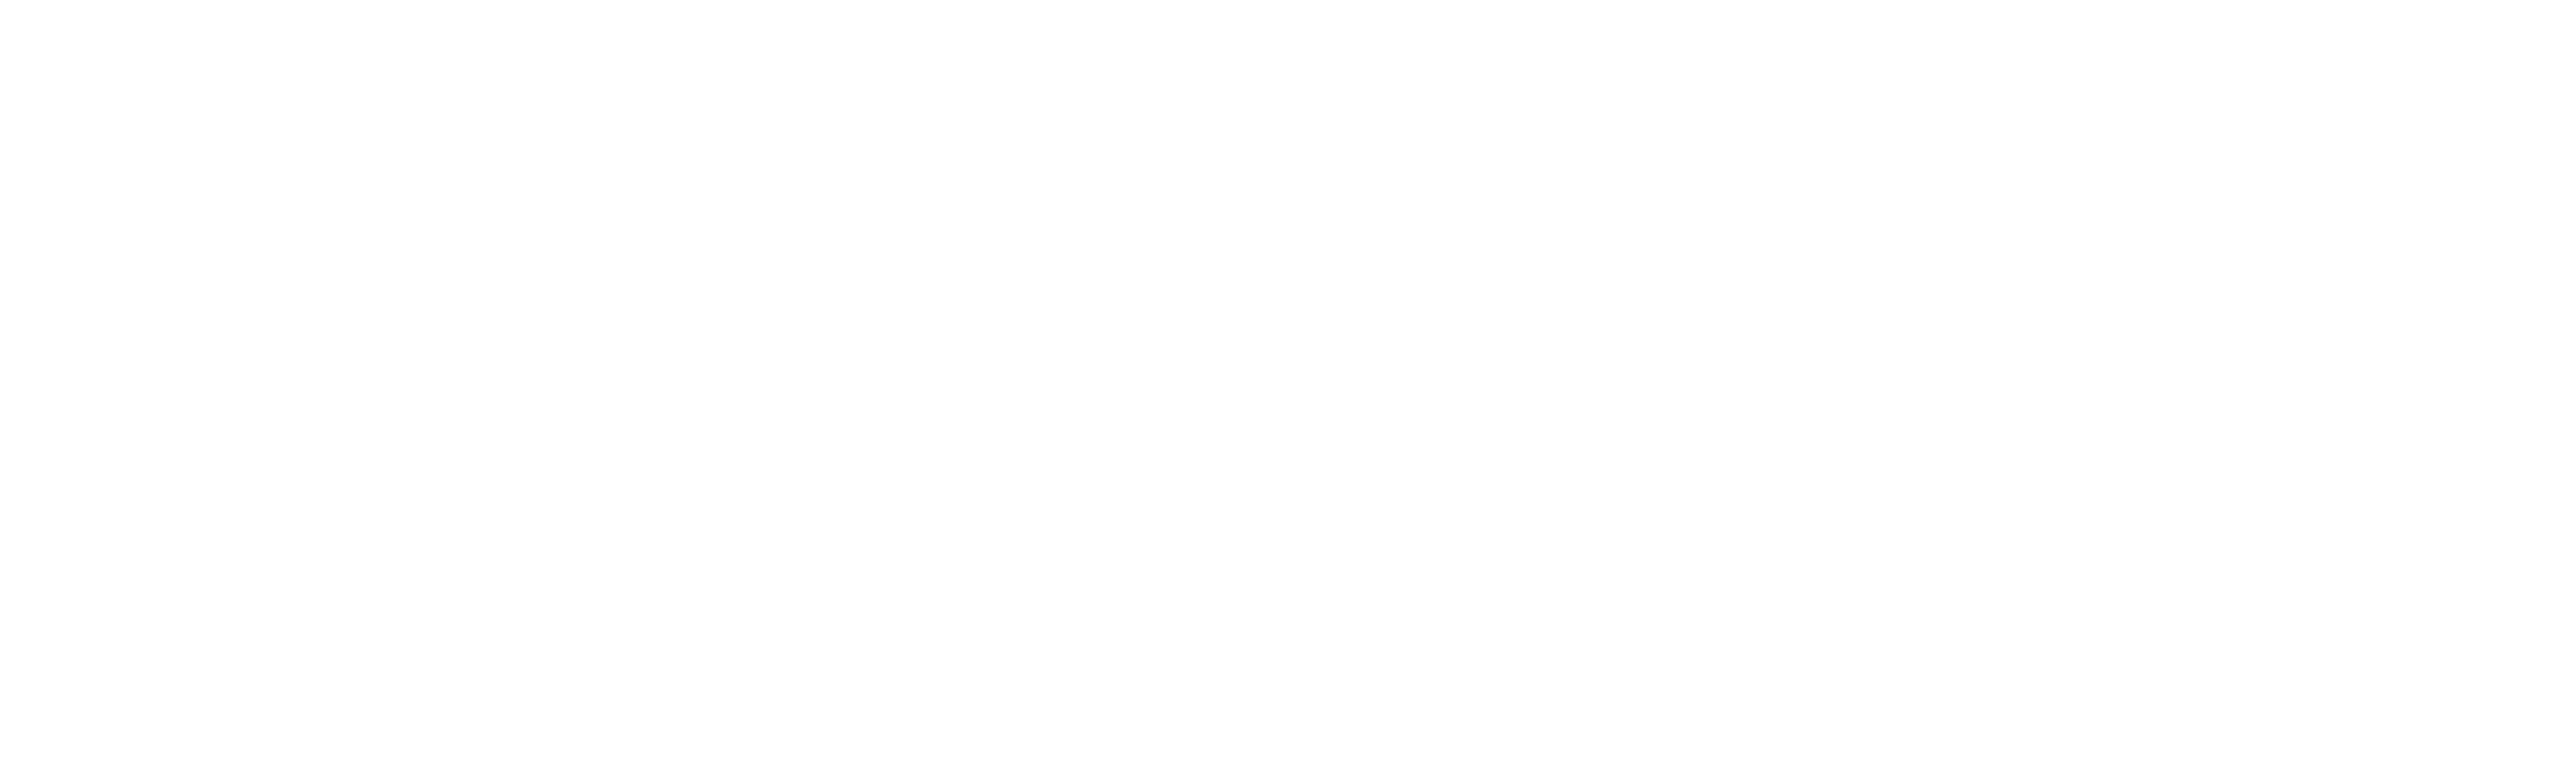 The Latin Explosion: A New America logo